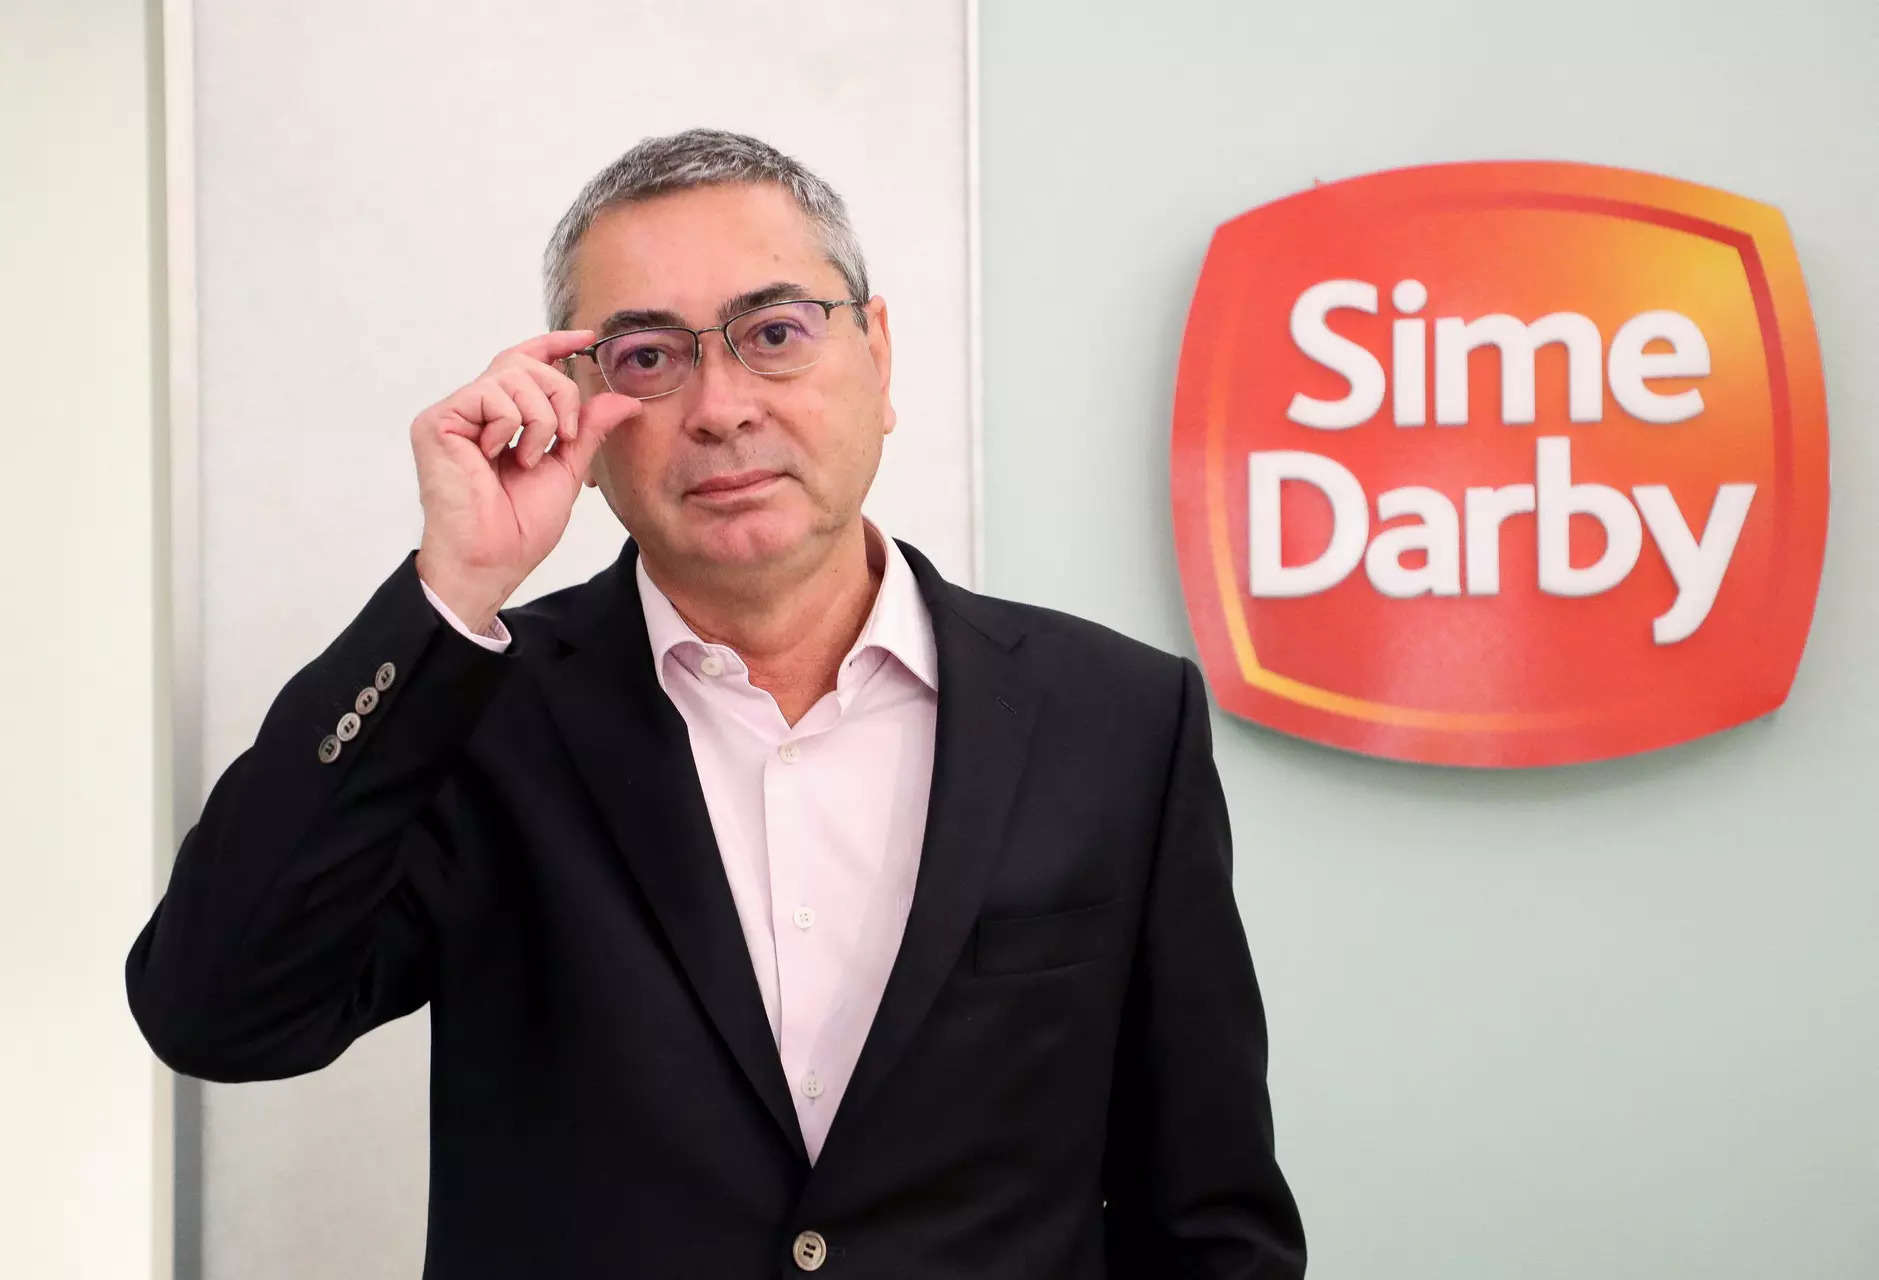 Malaysia’s Sime Darby seeks to expand car retail business into India, Indonesia – CEO